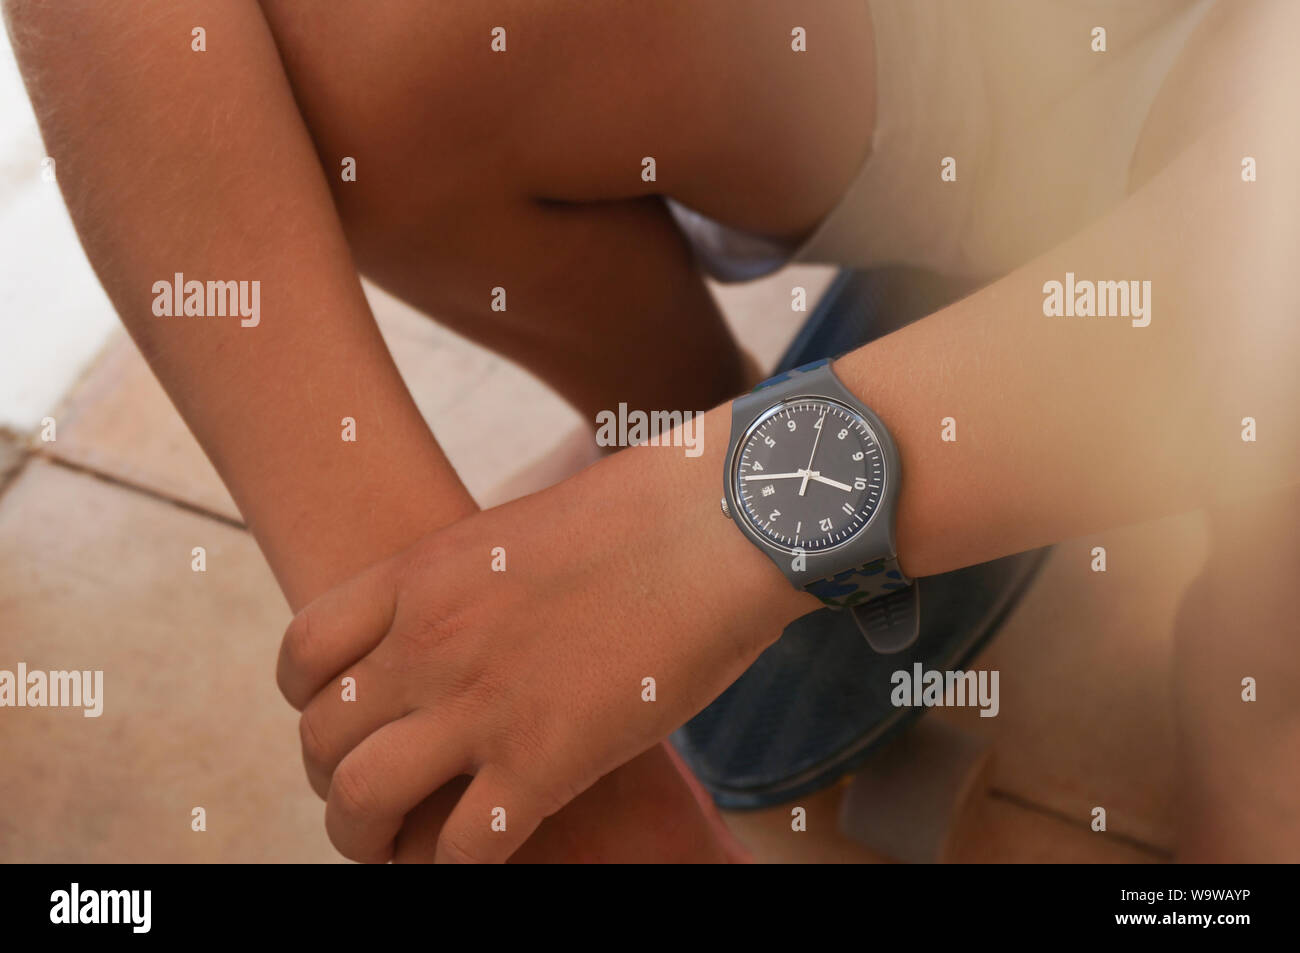 Alicante, Spain - August, 2019: Blue rubber Swatch watch on teenager's wrist sitting on skate board Stock Photo